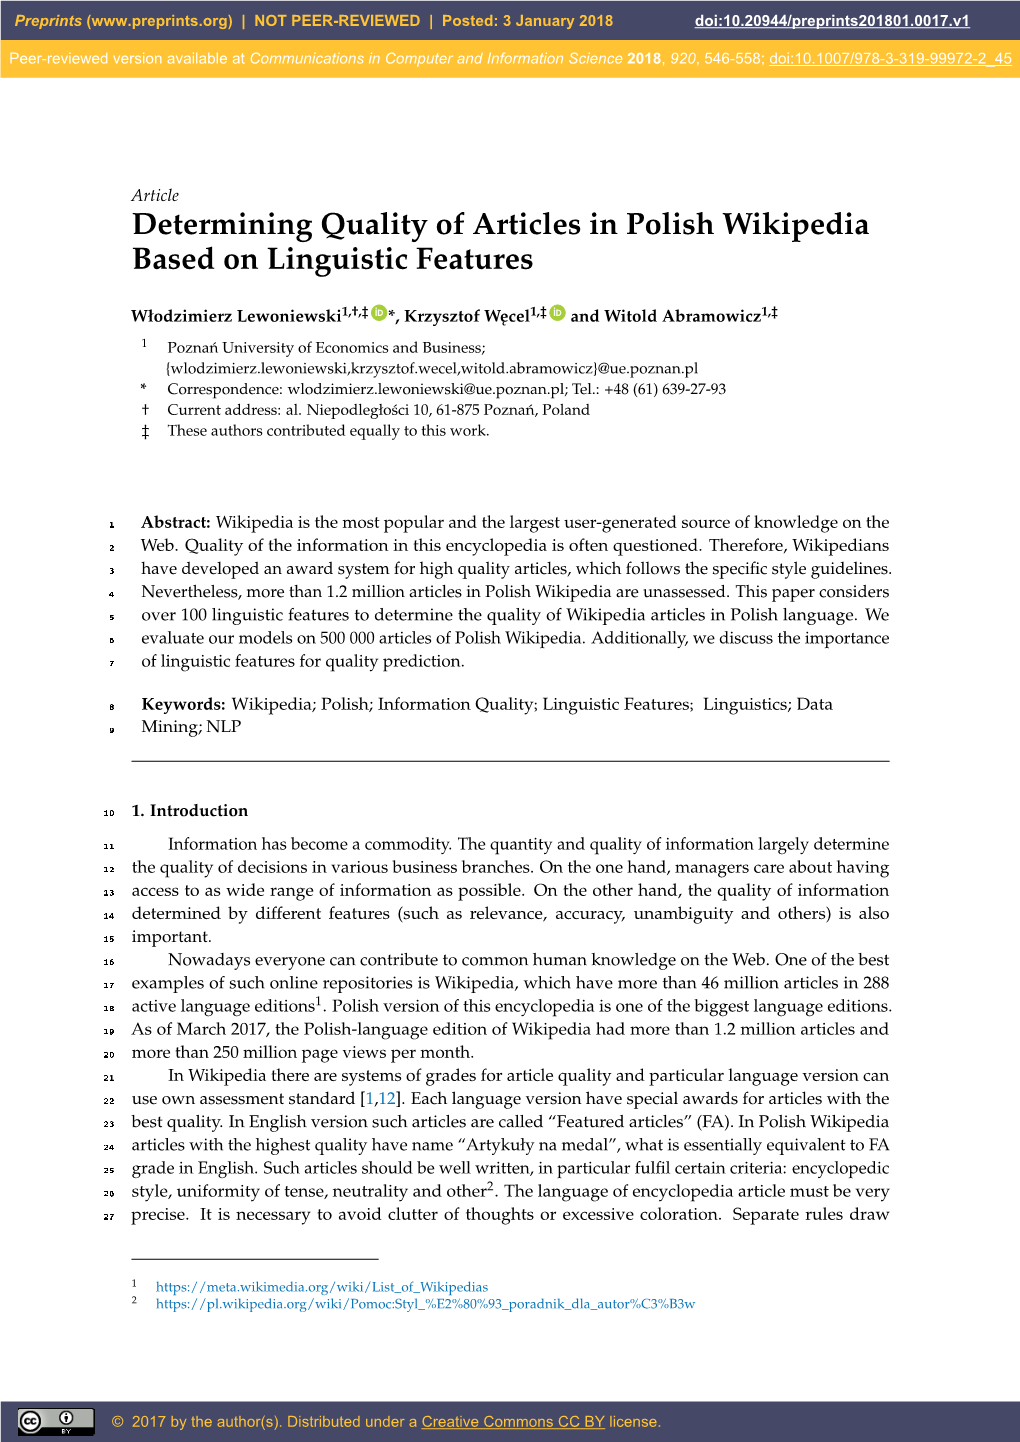 Determining Quality of Articles in Polish Wikipedia Based on Linguistic Features